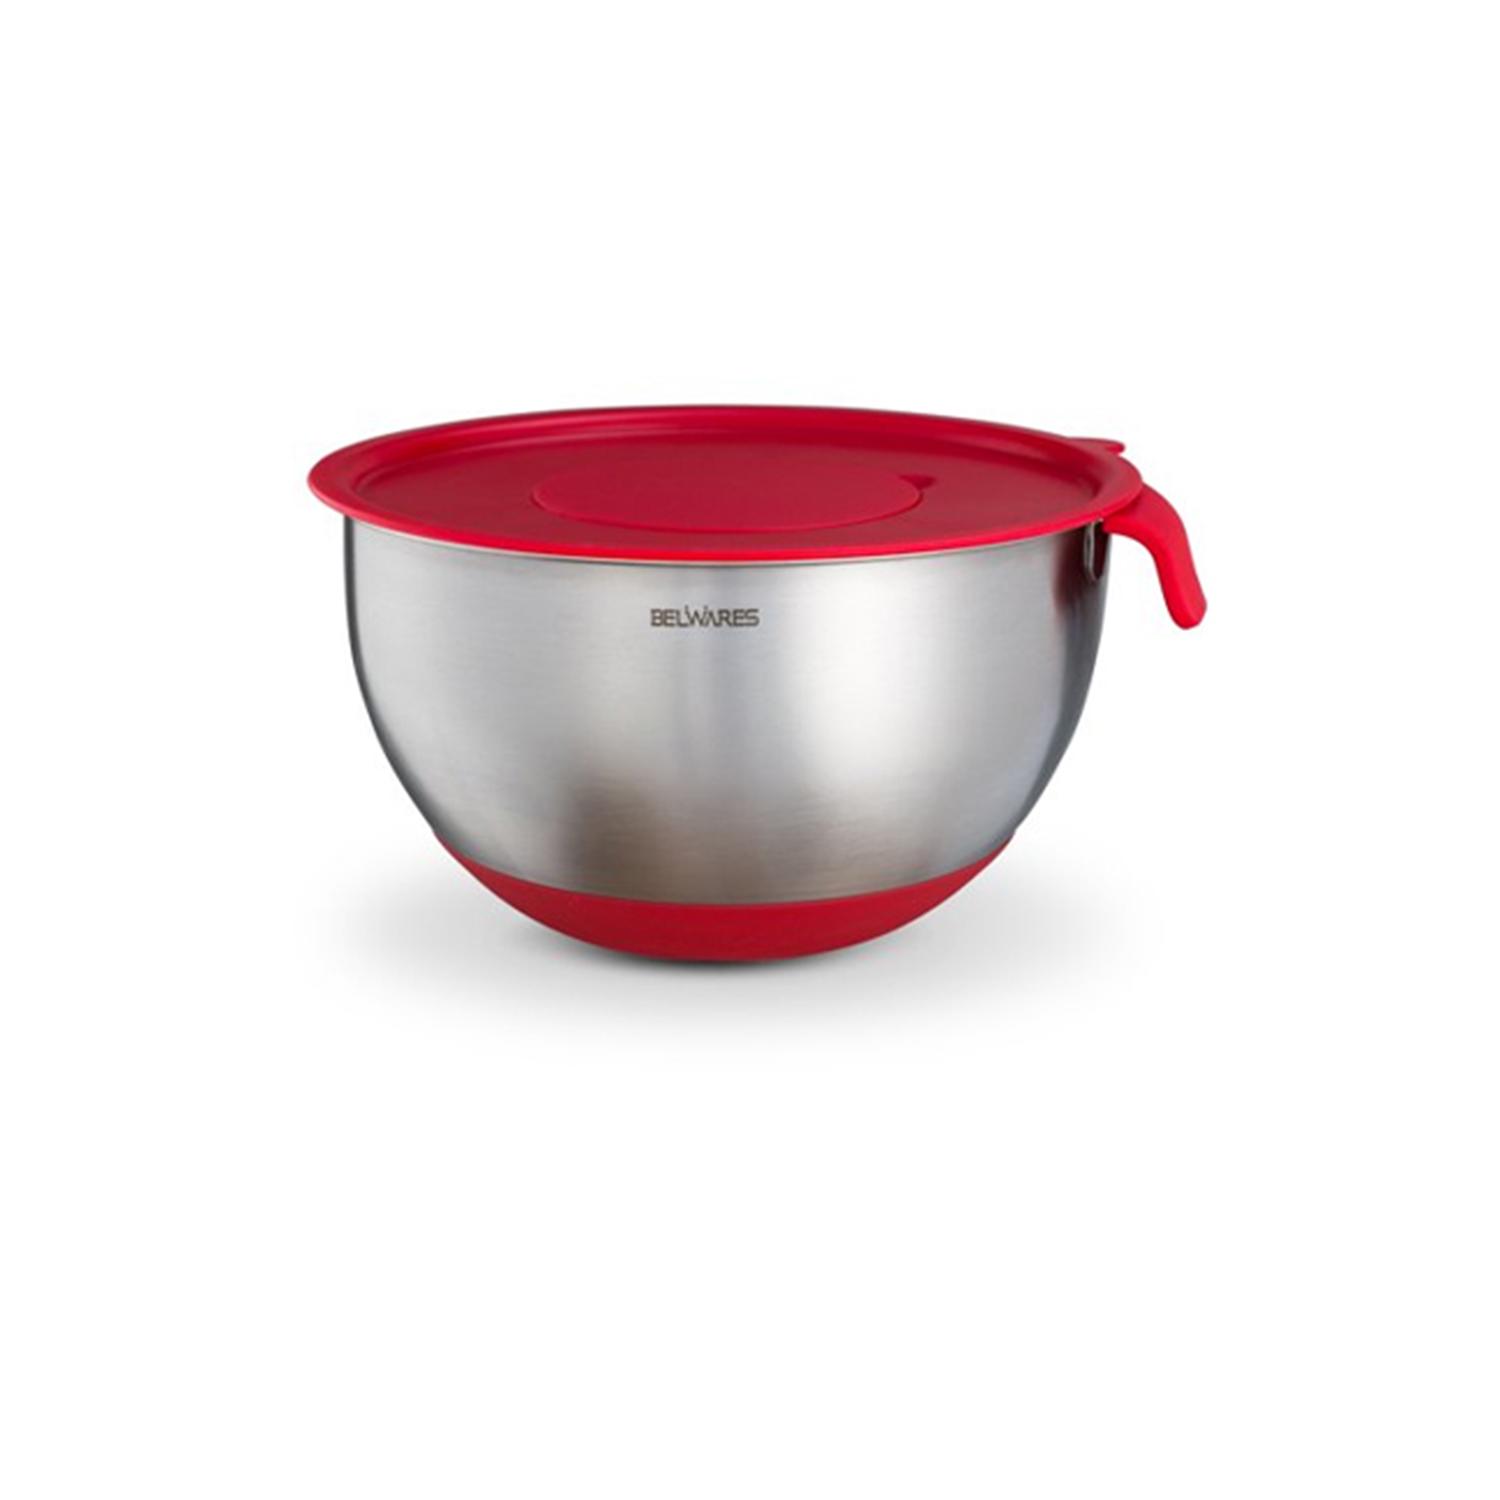 8.5'' STAINLESS STEEL MIXING BOWL WITH HANDLE AND SILICONE BASE